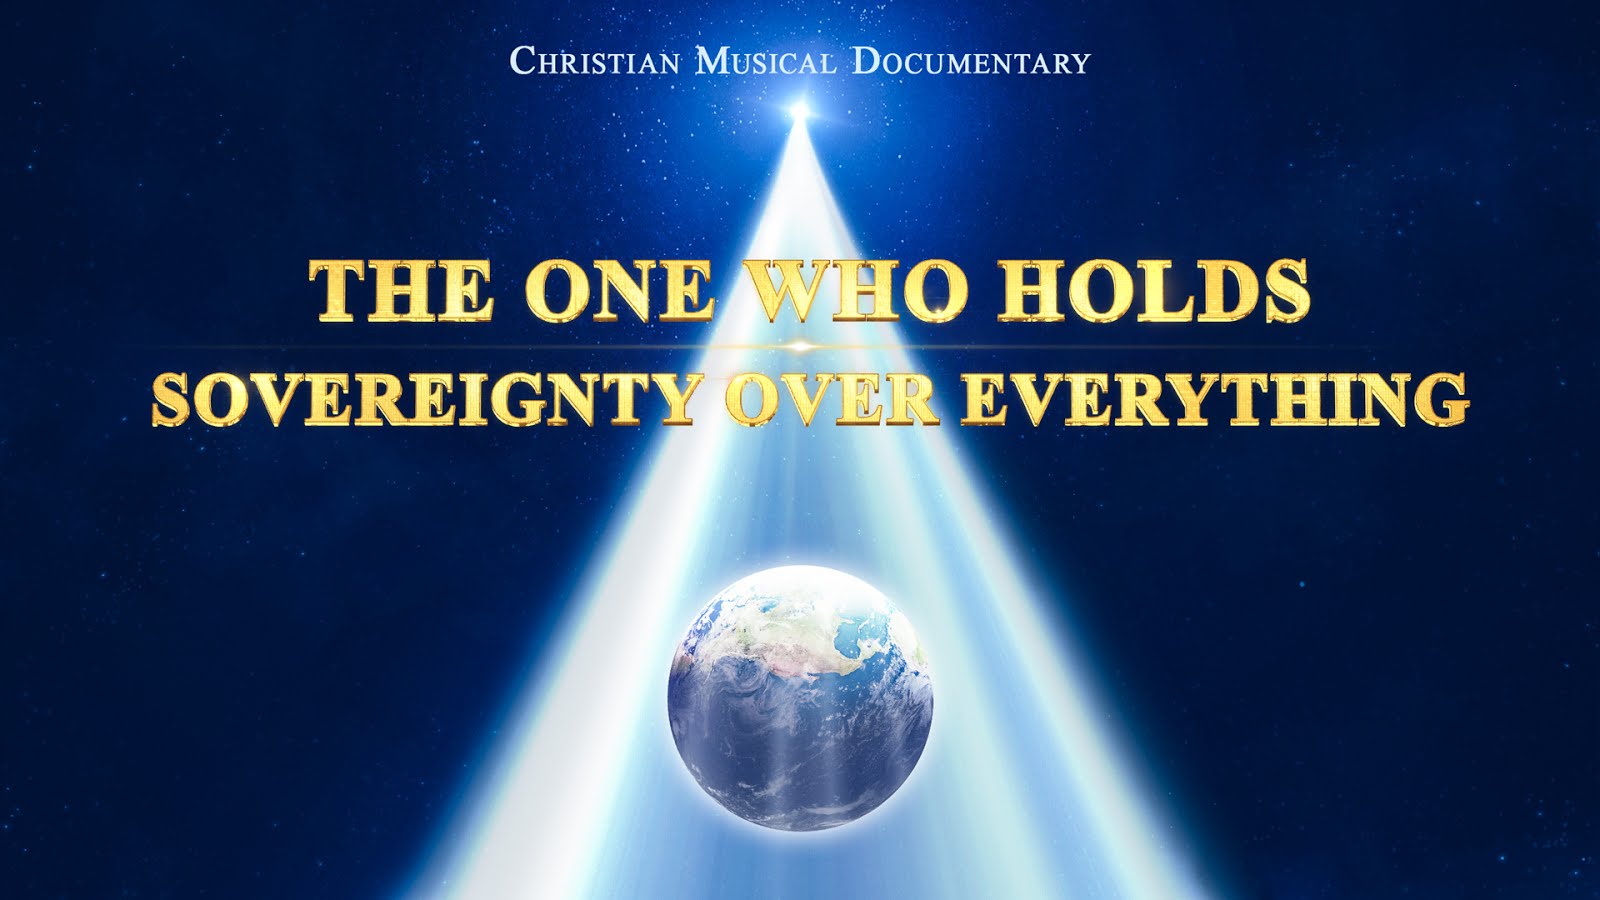 The One Who Holds Sovereignty Over Everything